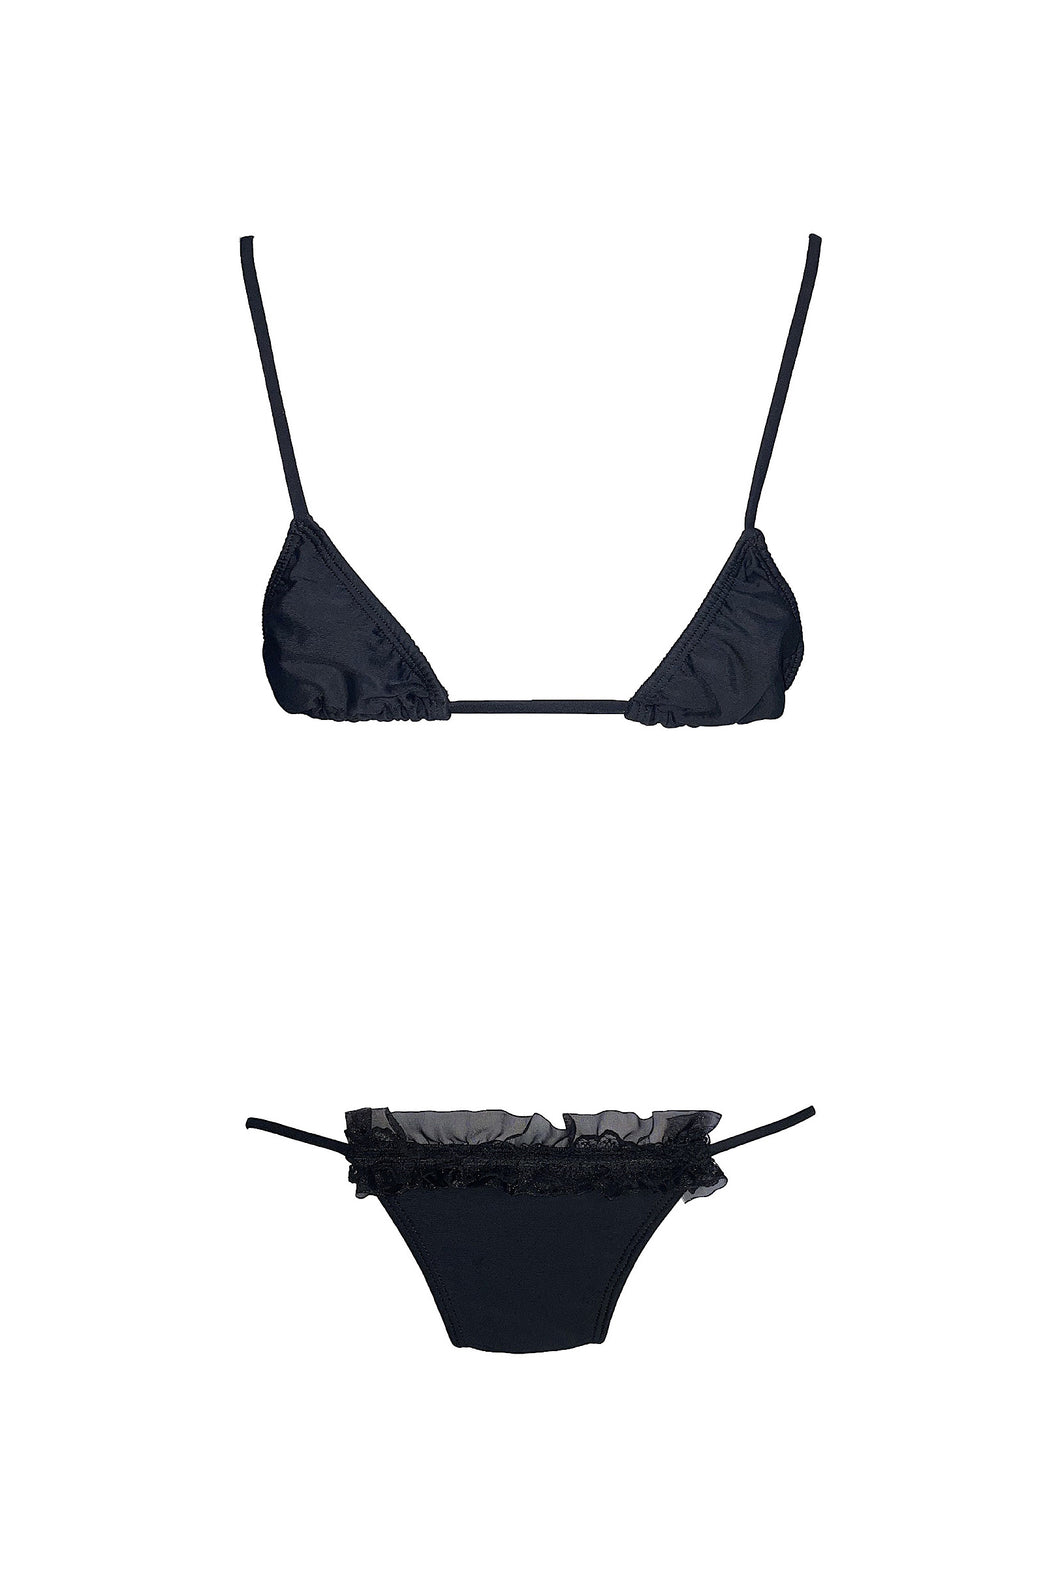 Triangle swim set made for minimal tan lines and coverage.